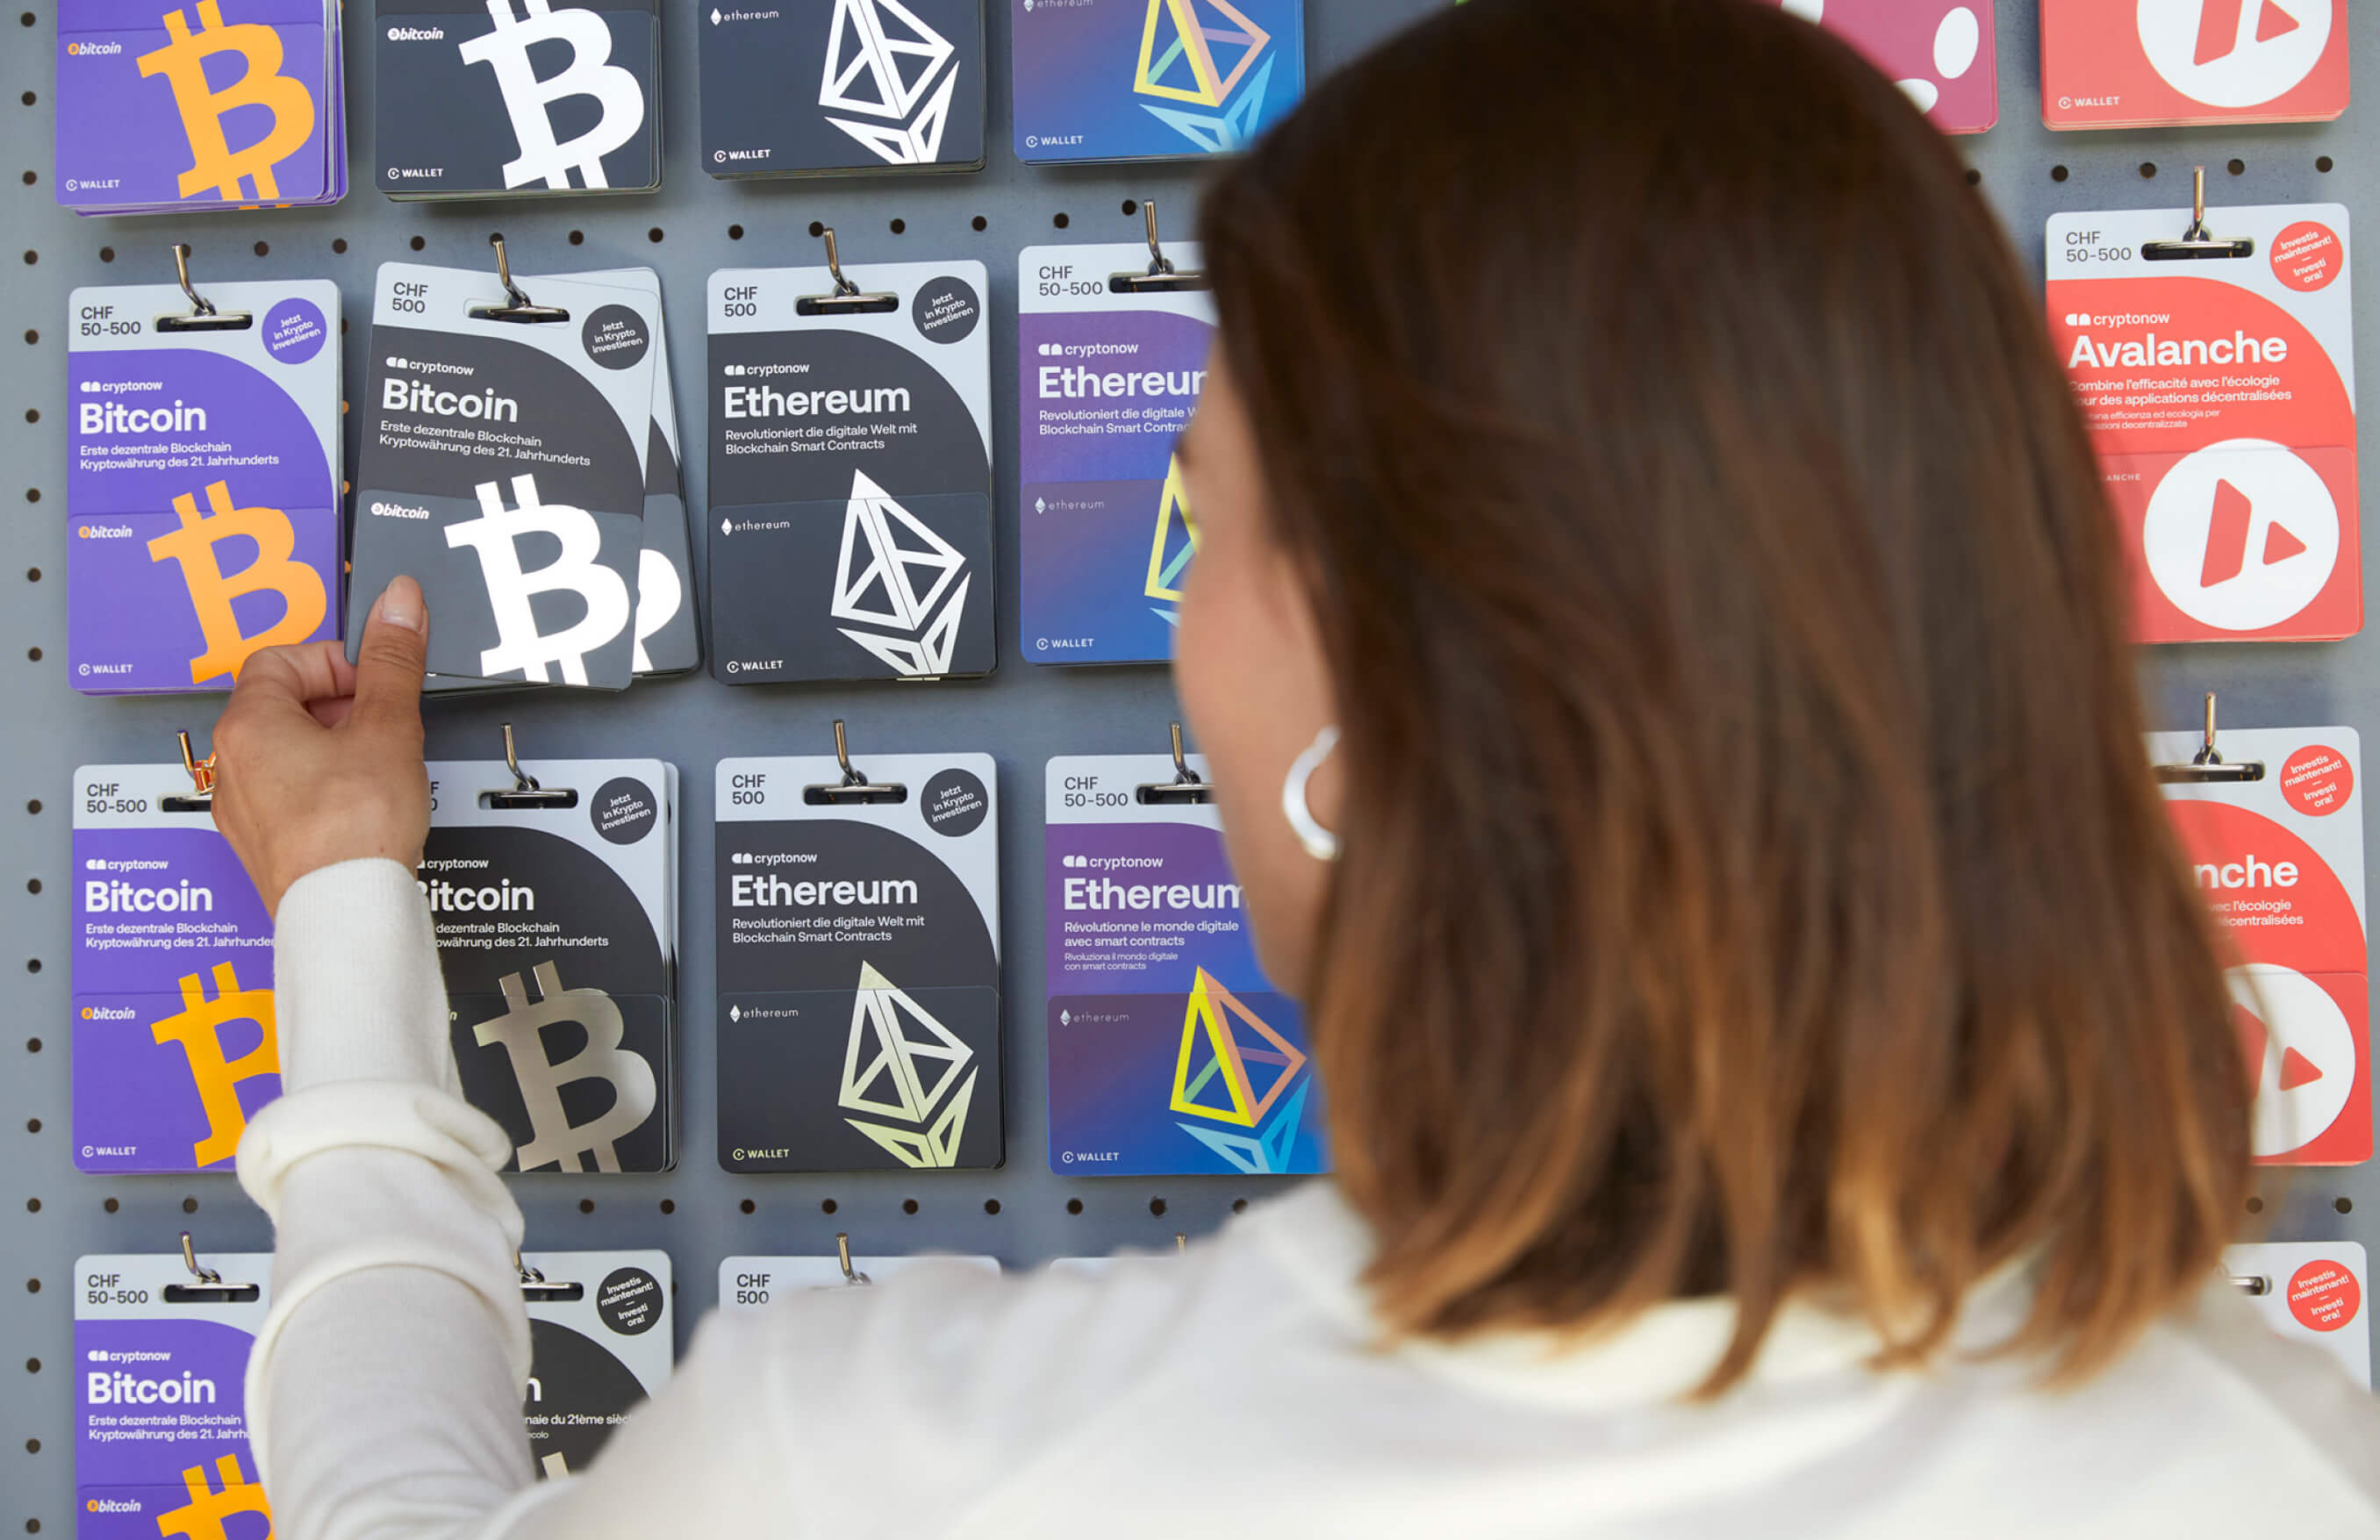 A person buys a Cryptonow gift card in the store